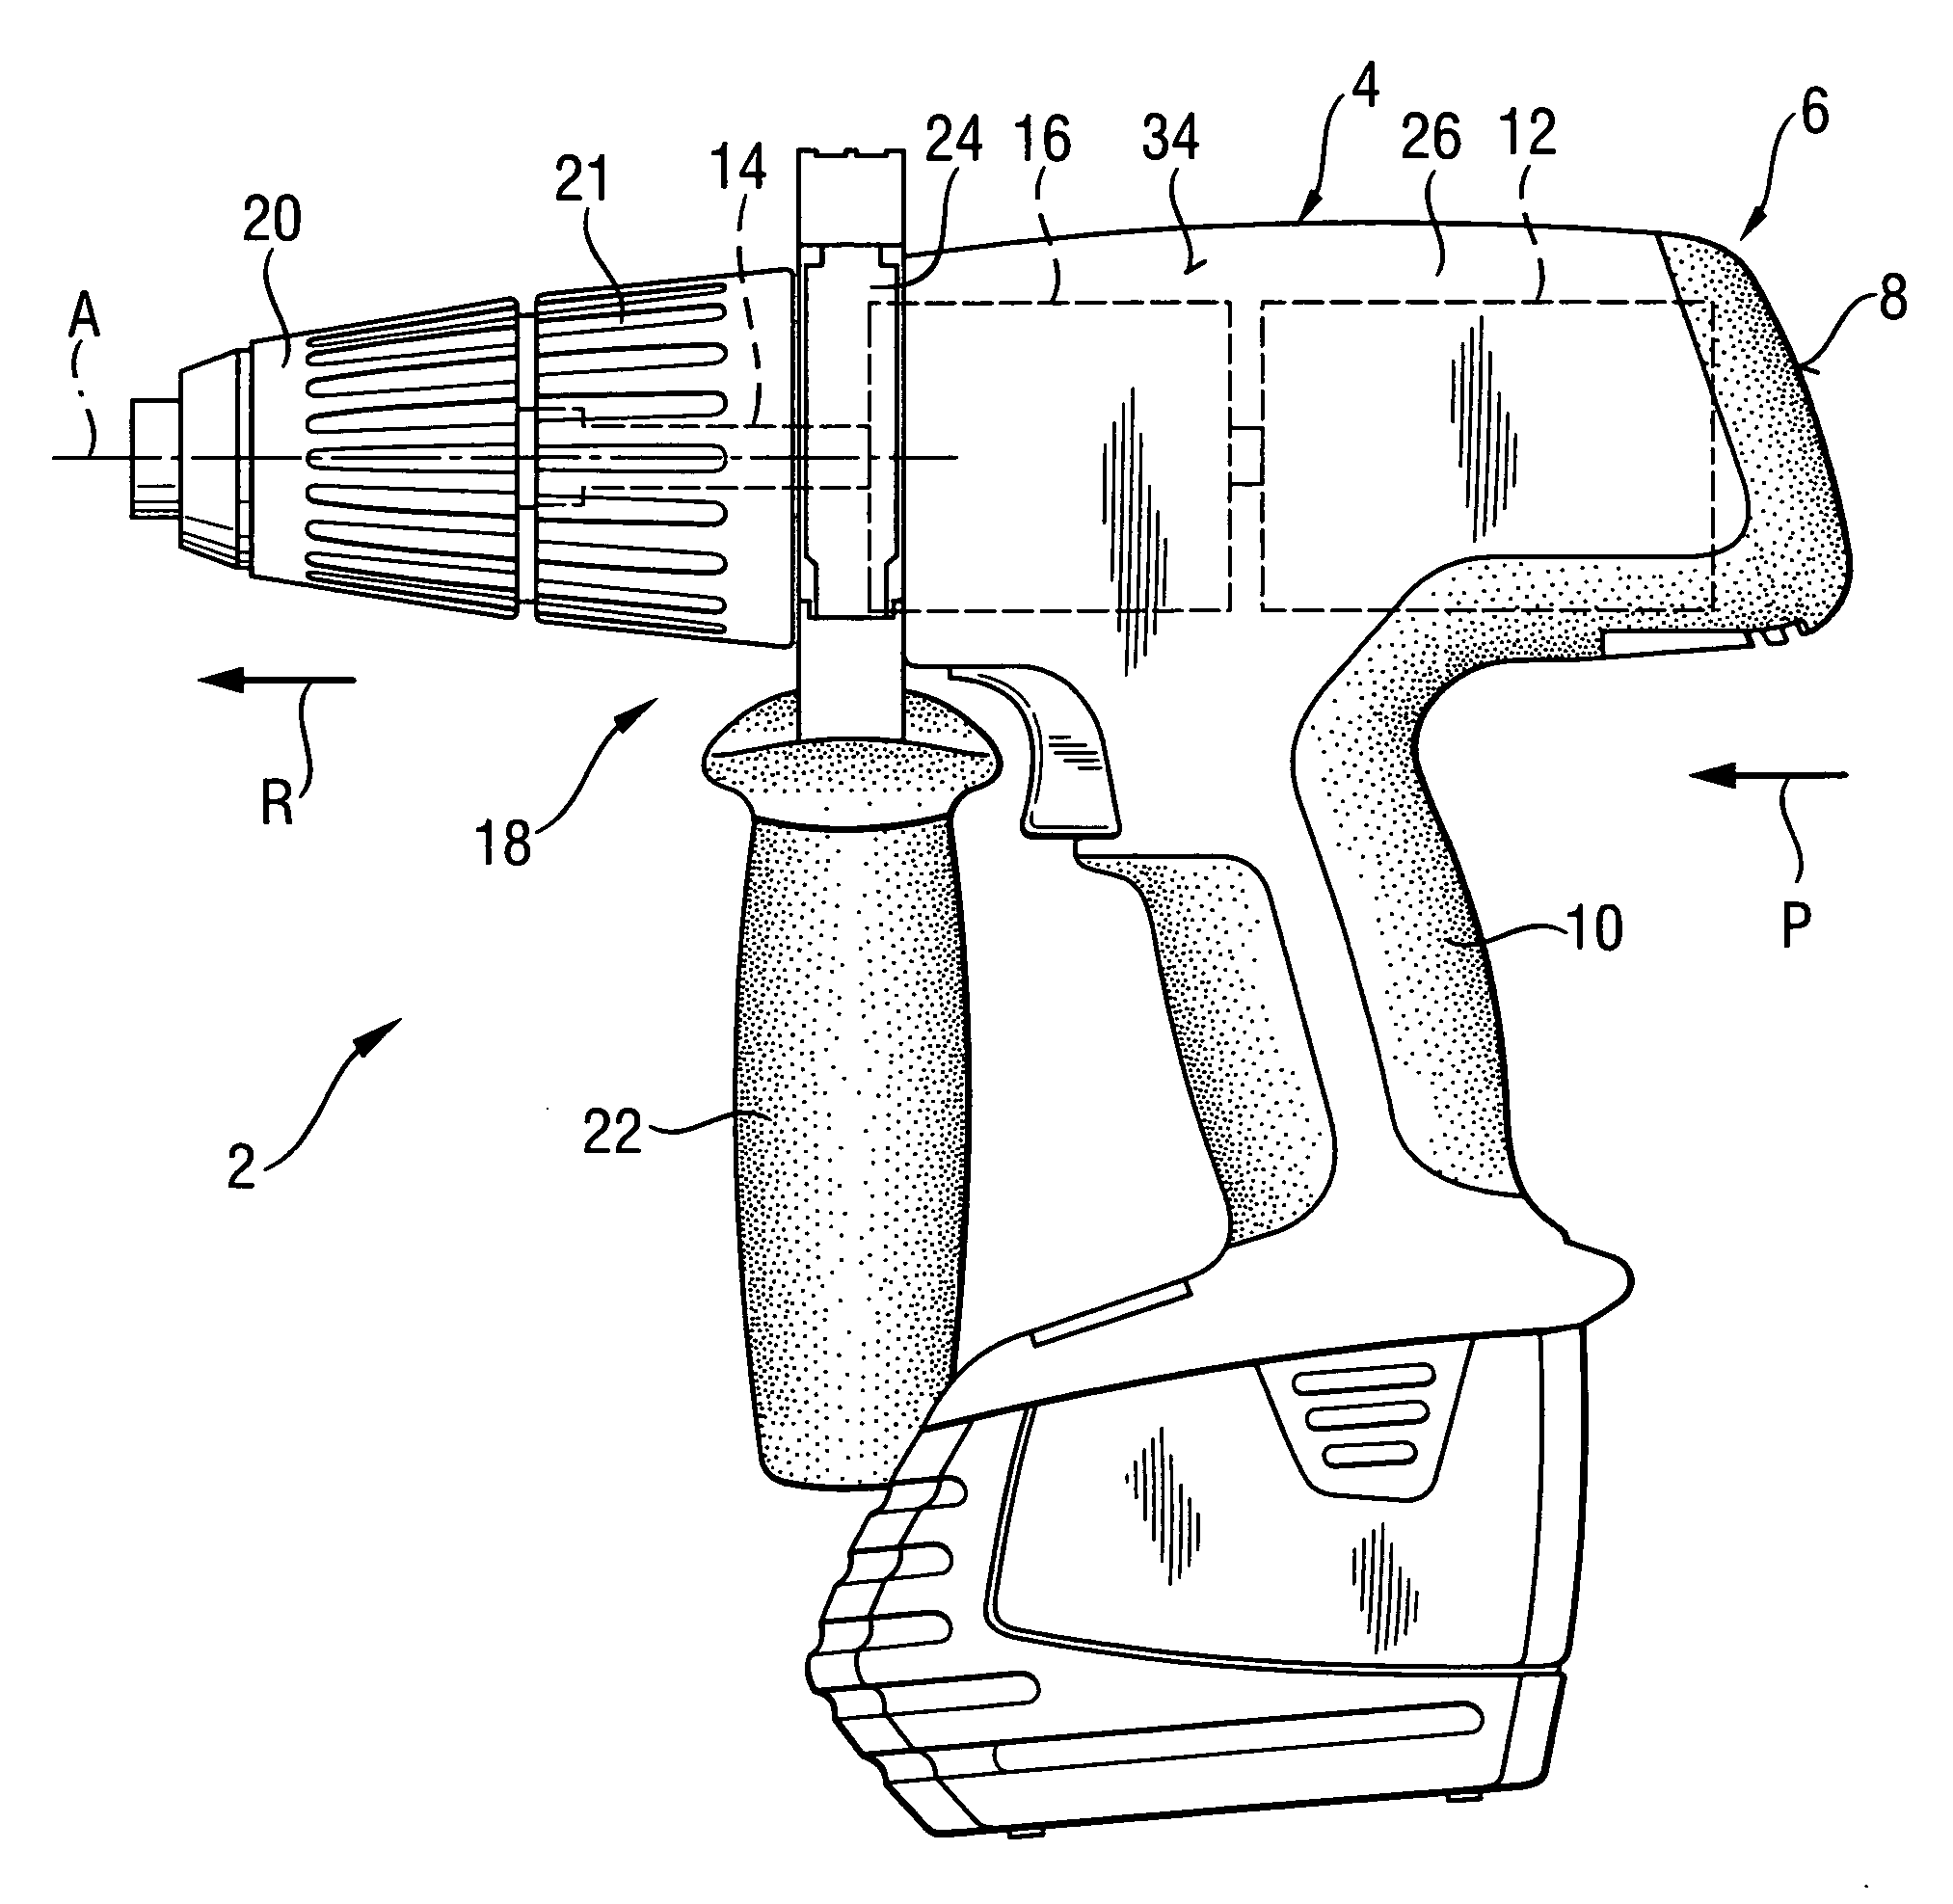 Hand-held power tool with ratchet percussion mechanism